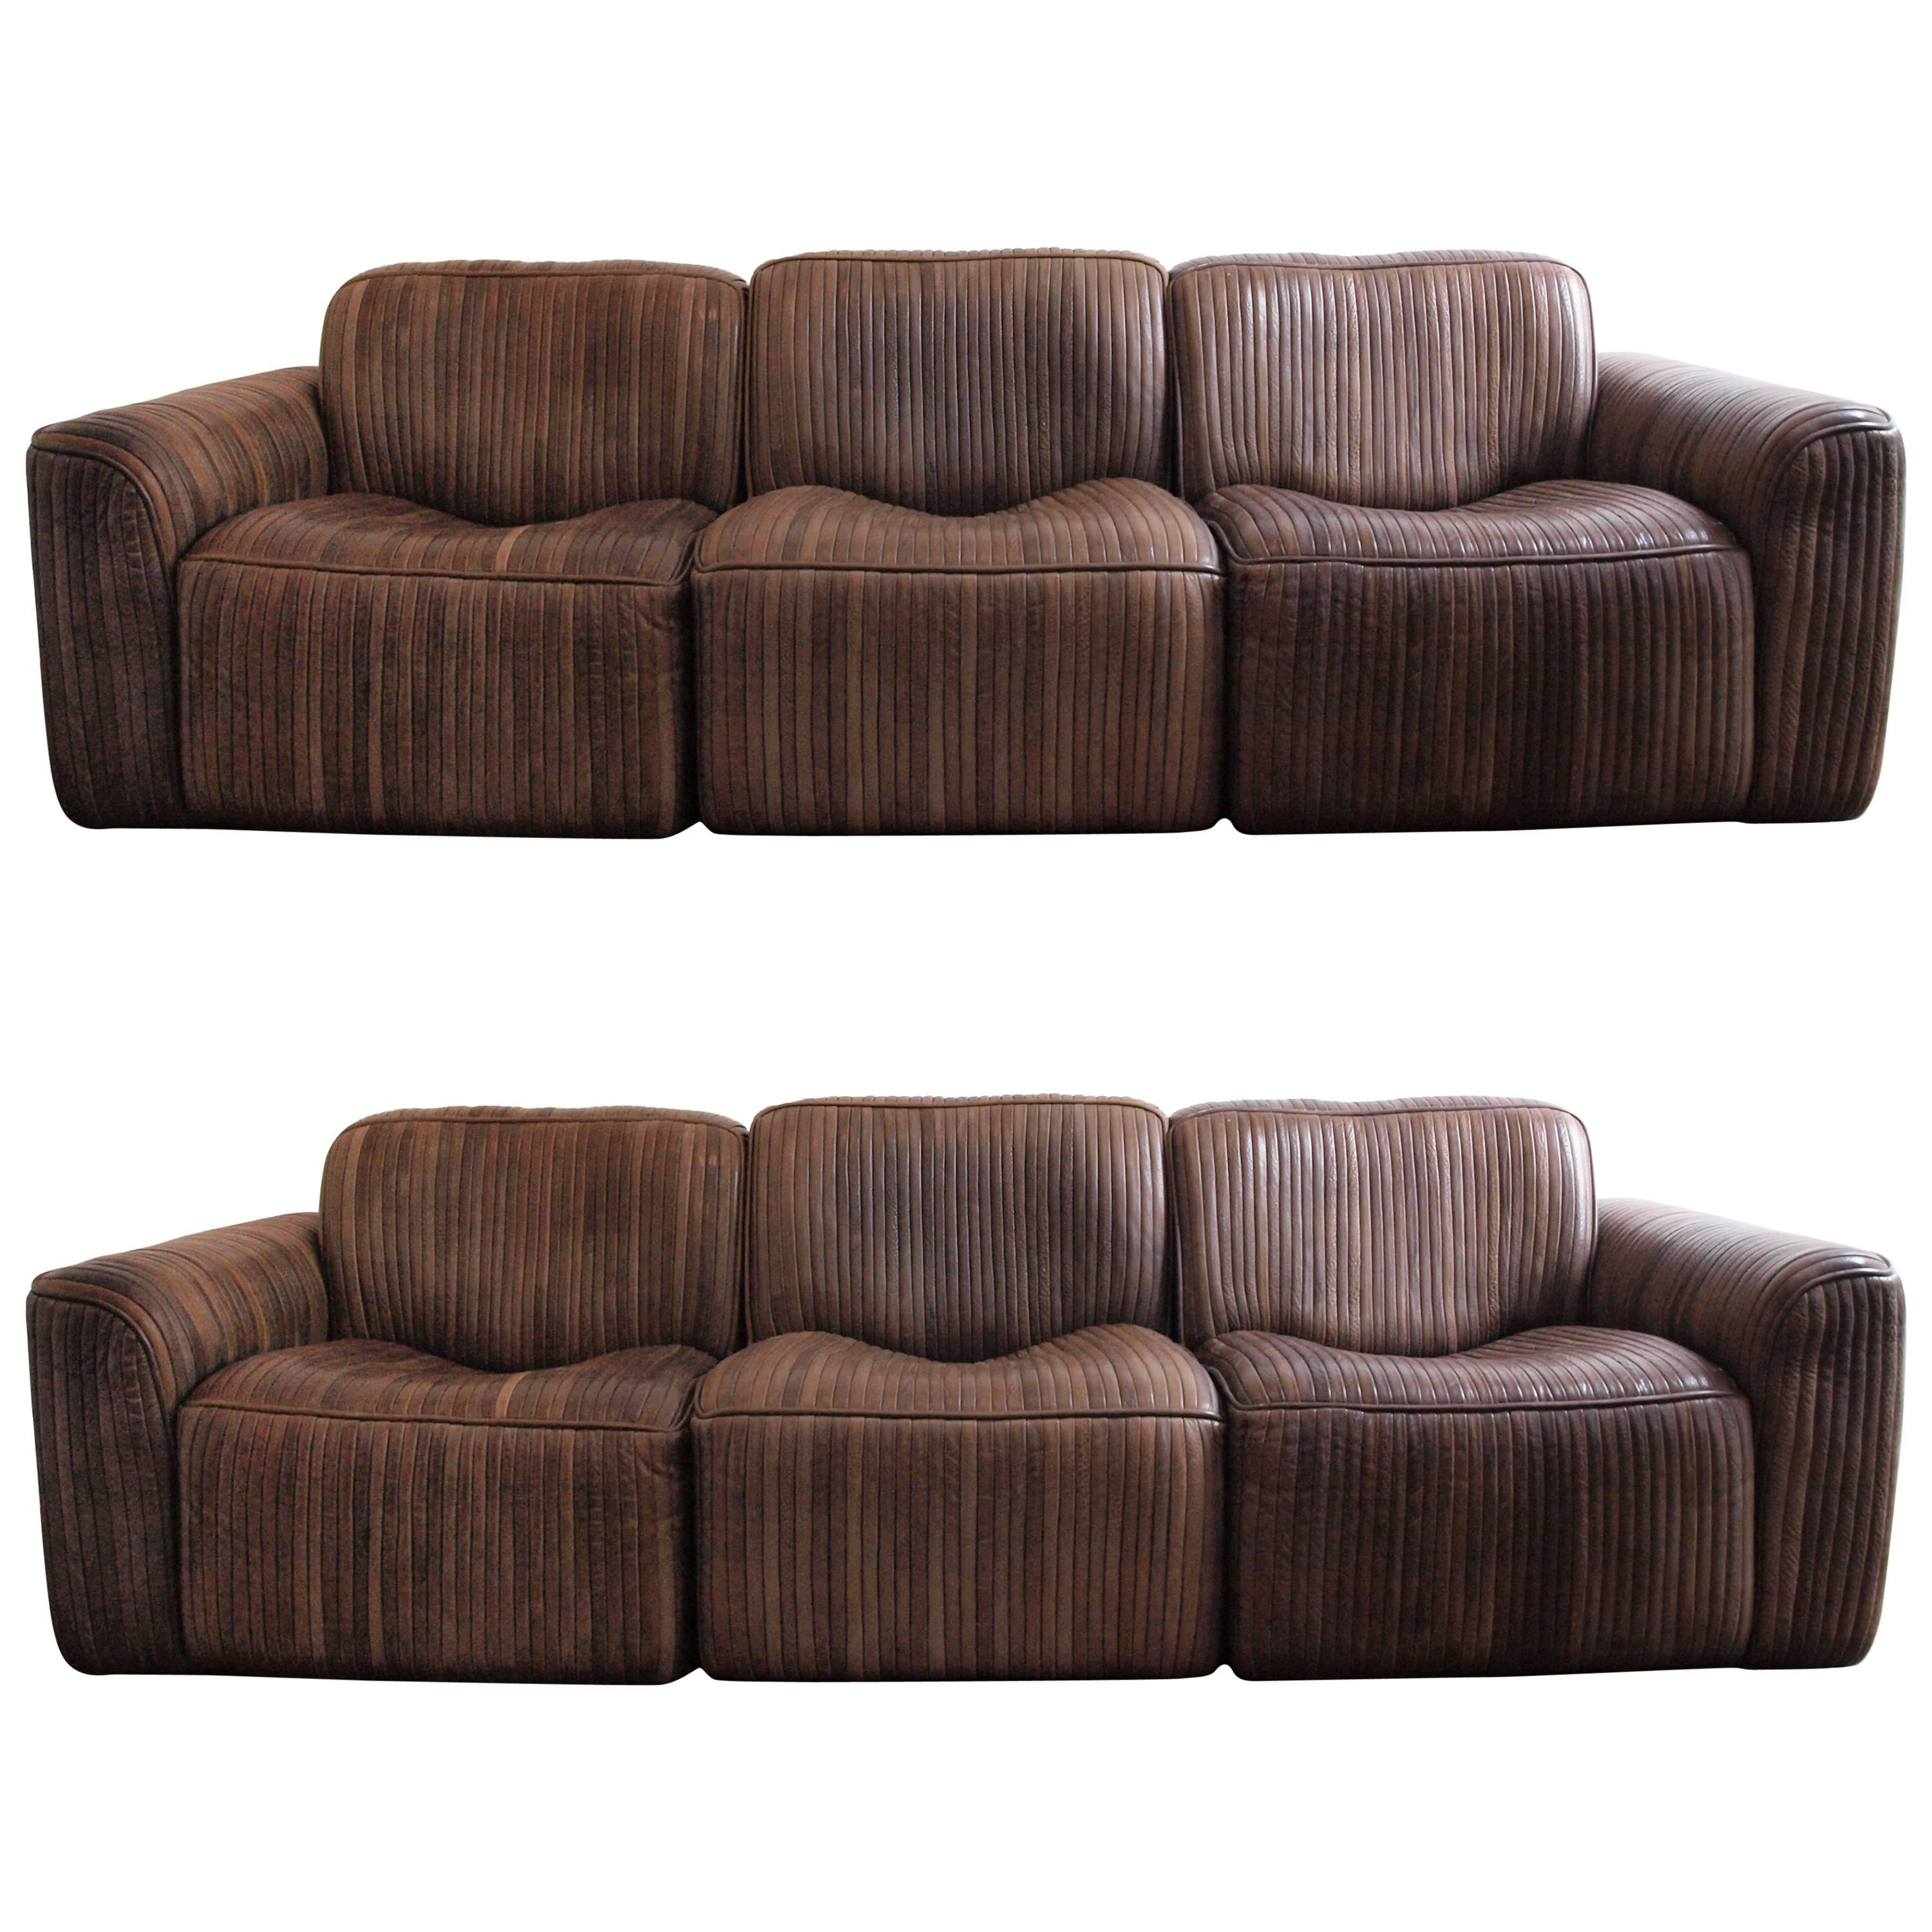 Pair of Leather Strip Three-Seat Sofas Attributed to De Sede